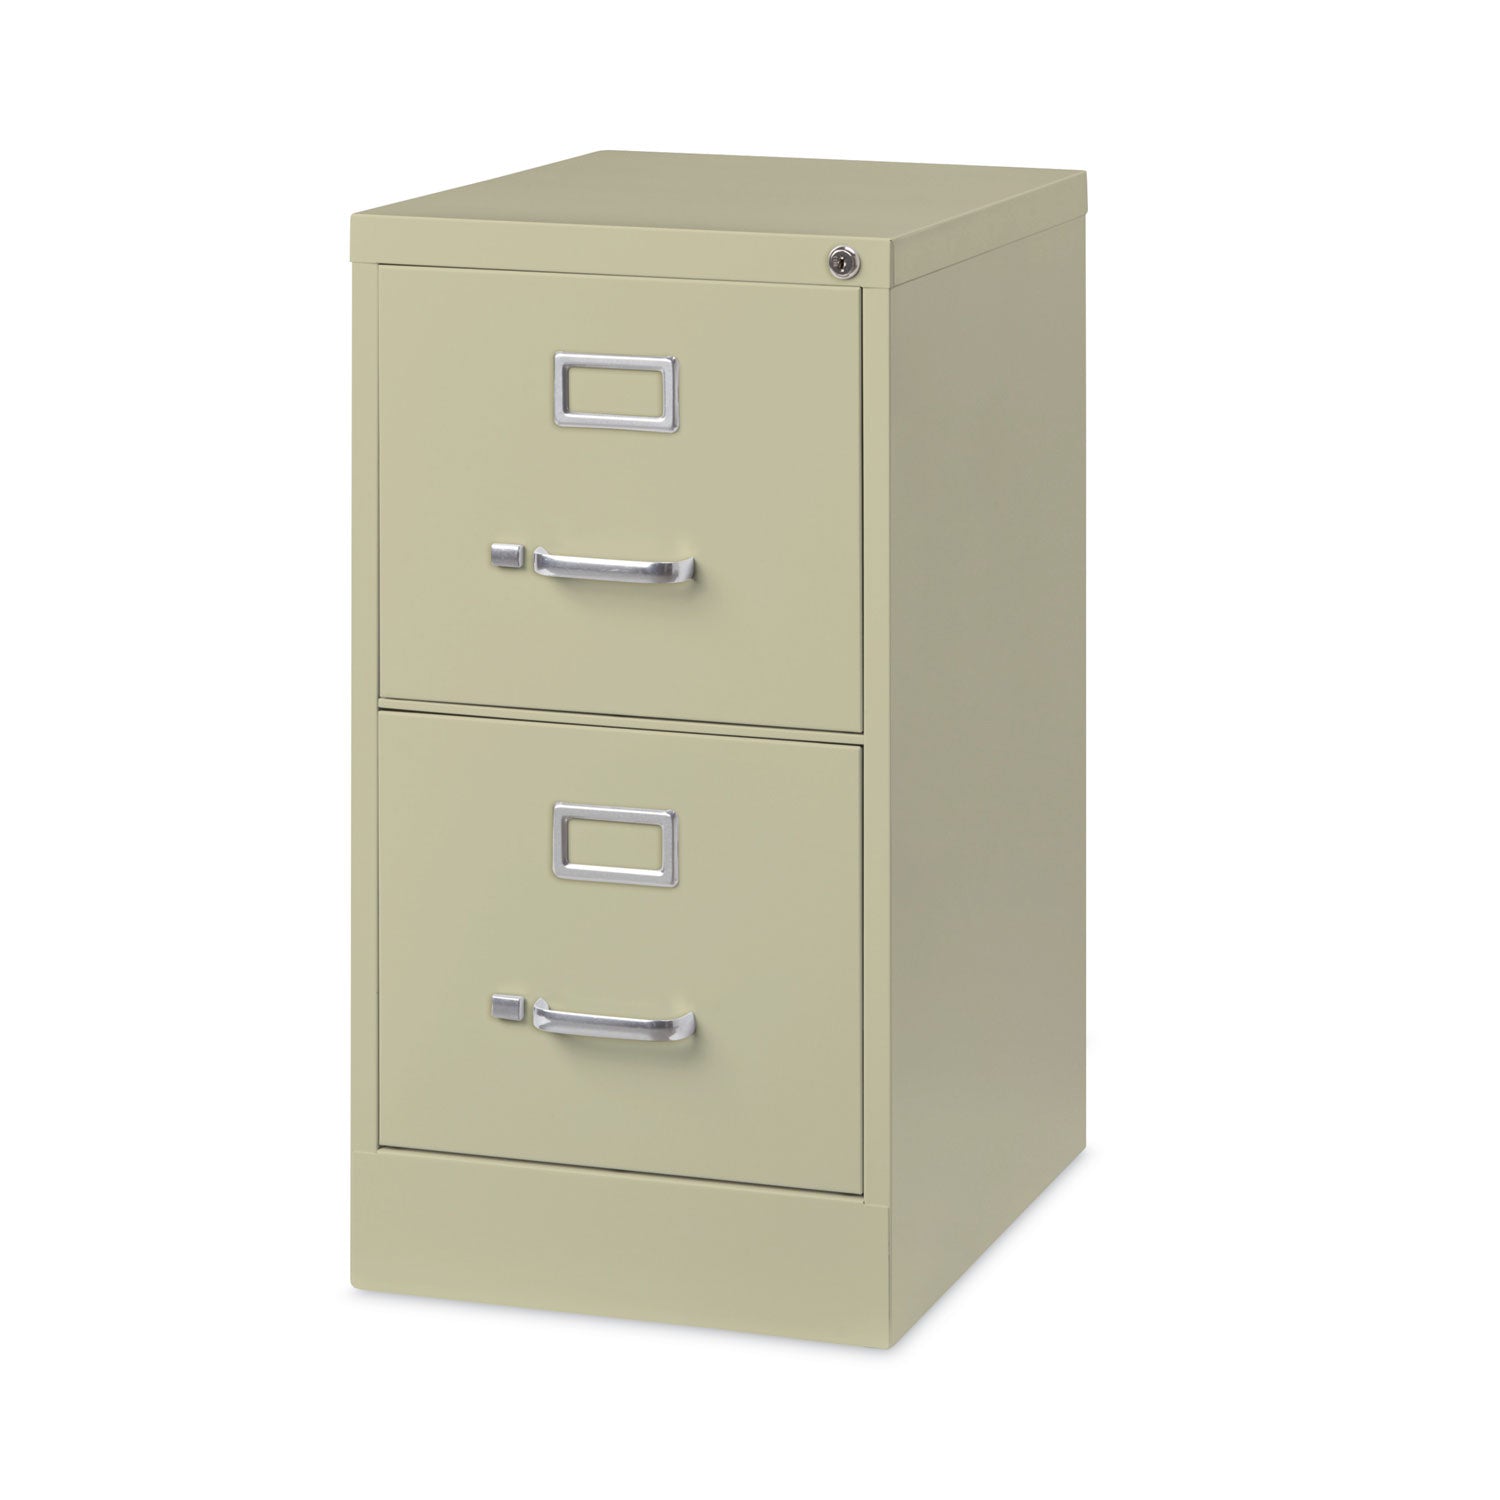 vertical-letter-file-cabinet-2-letter-size-file-drawers-putty-15-x-22-x-2837_hid17889 - 4